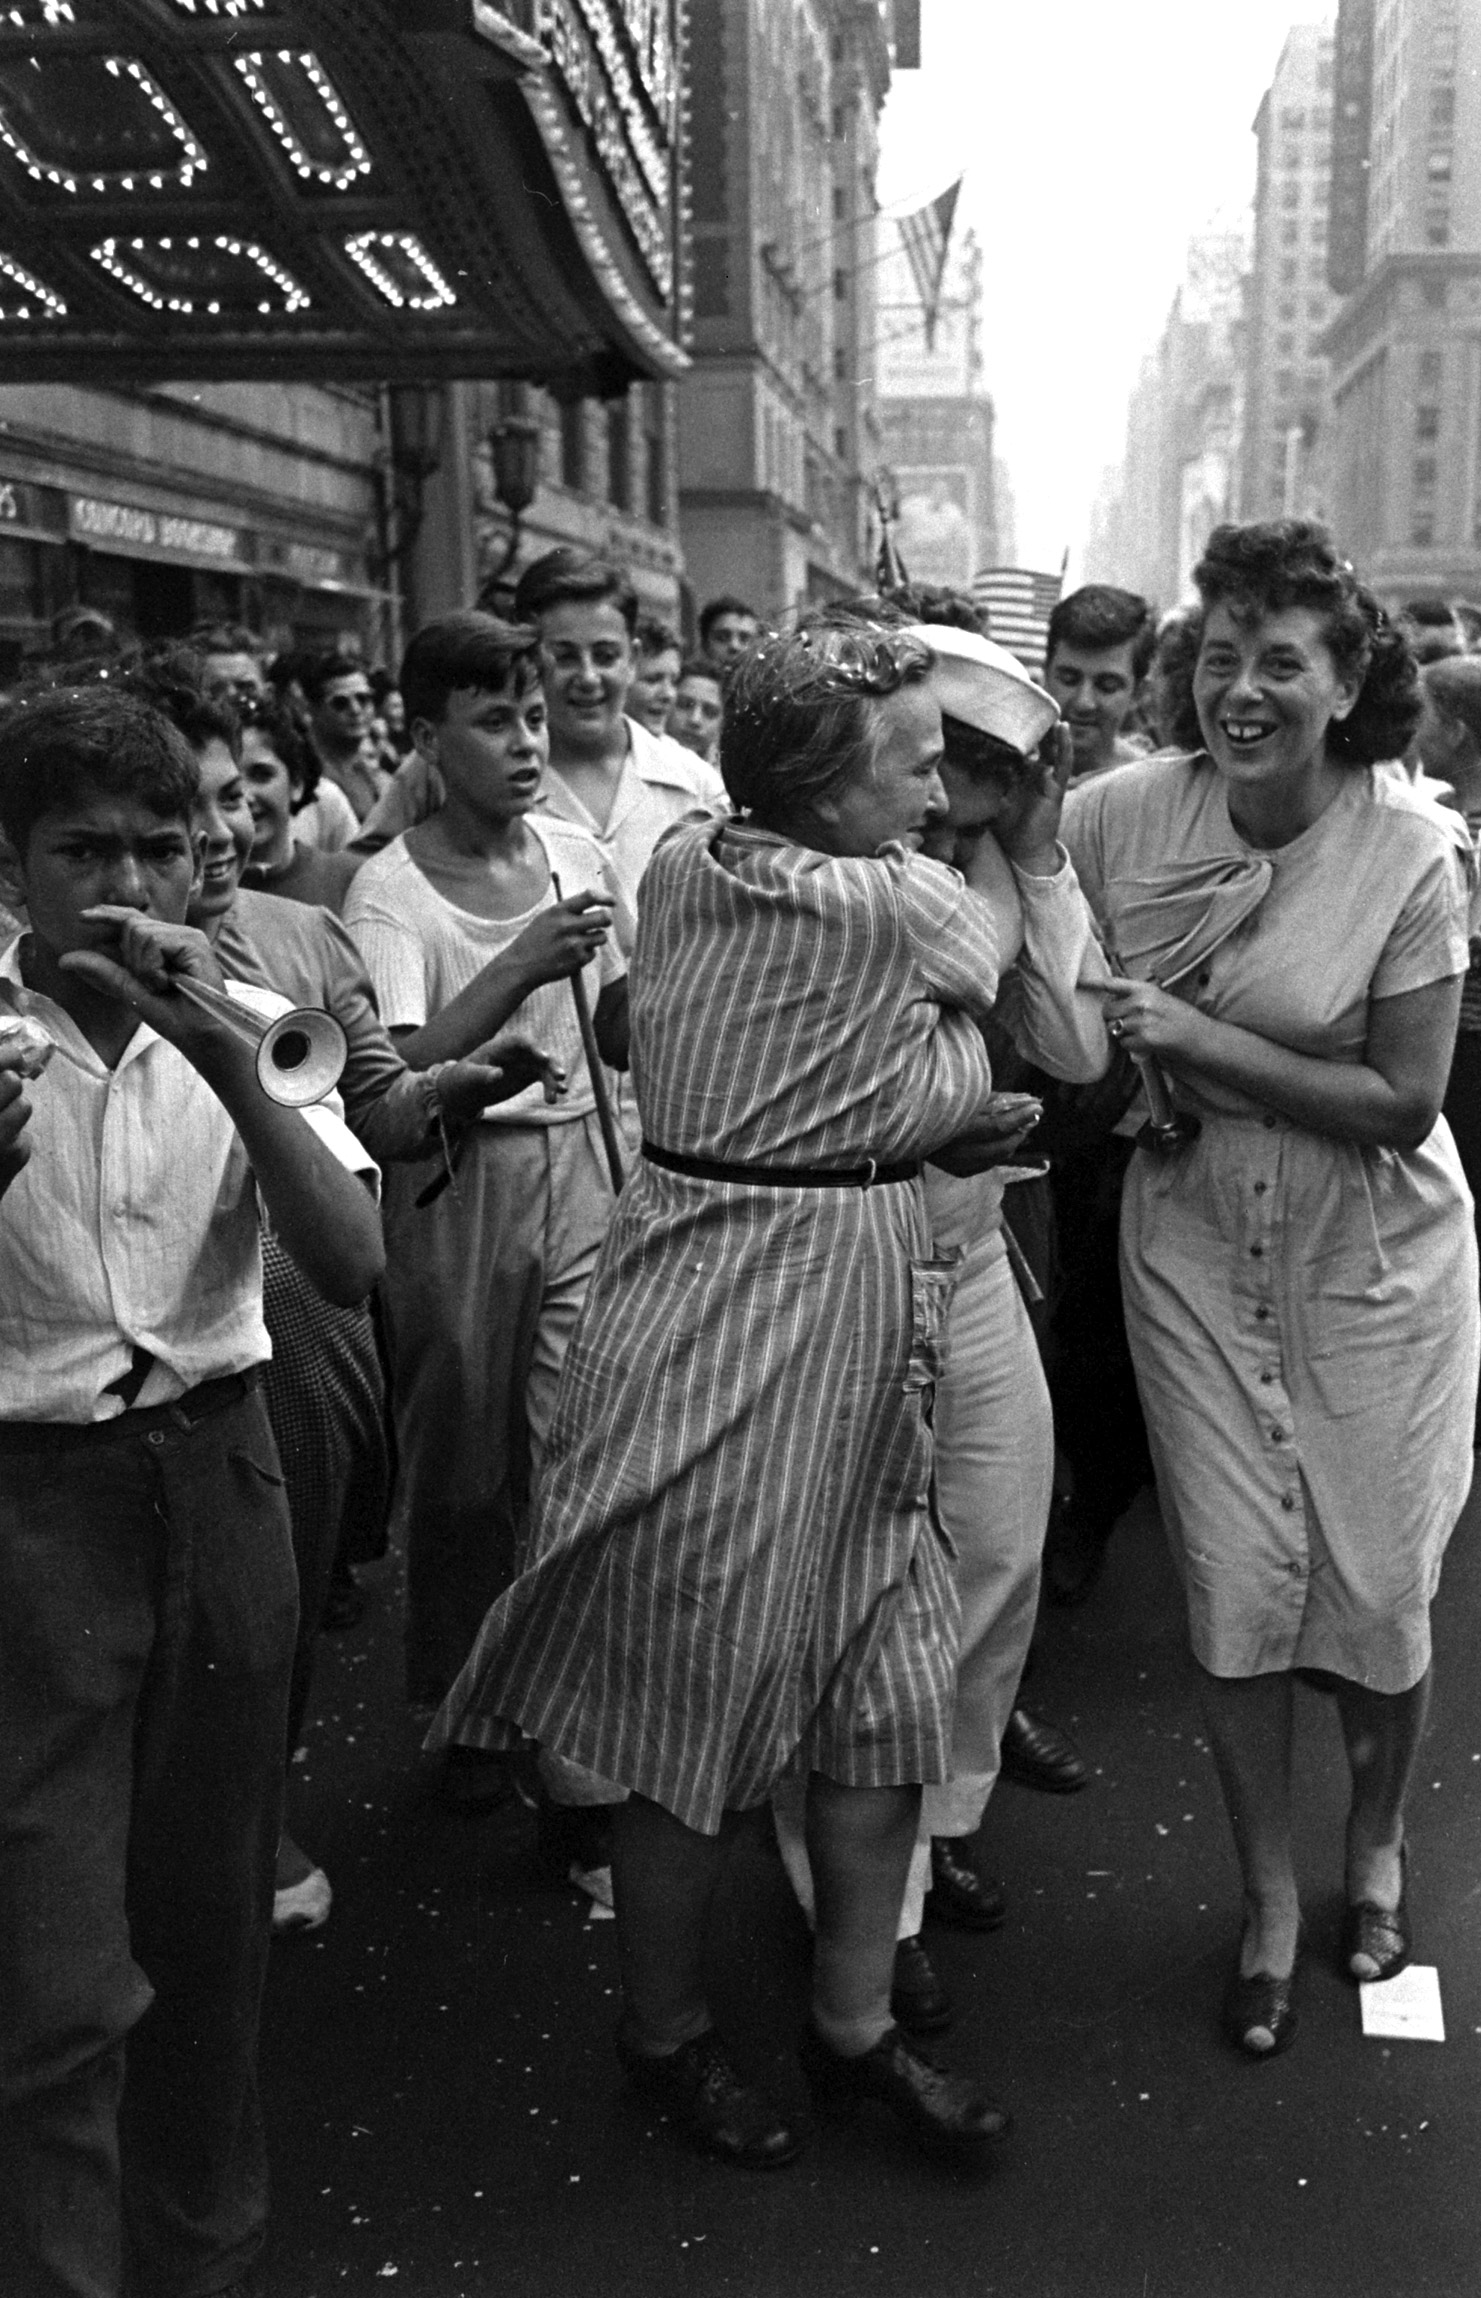 V-J Day celebrations in Times Square, August 14, 1945.